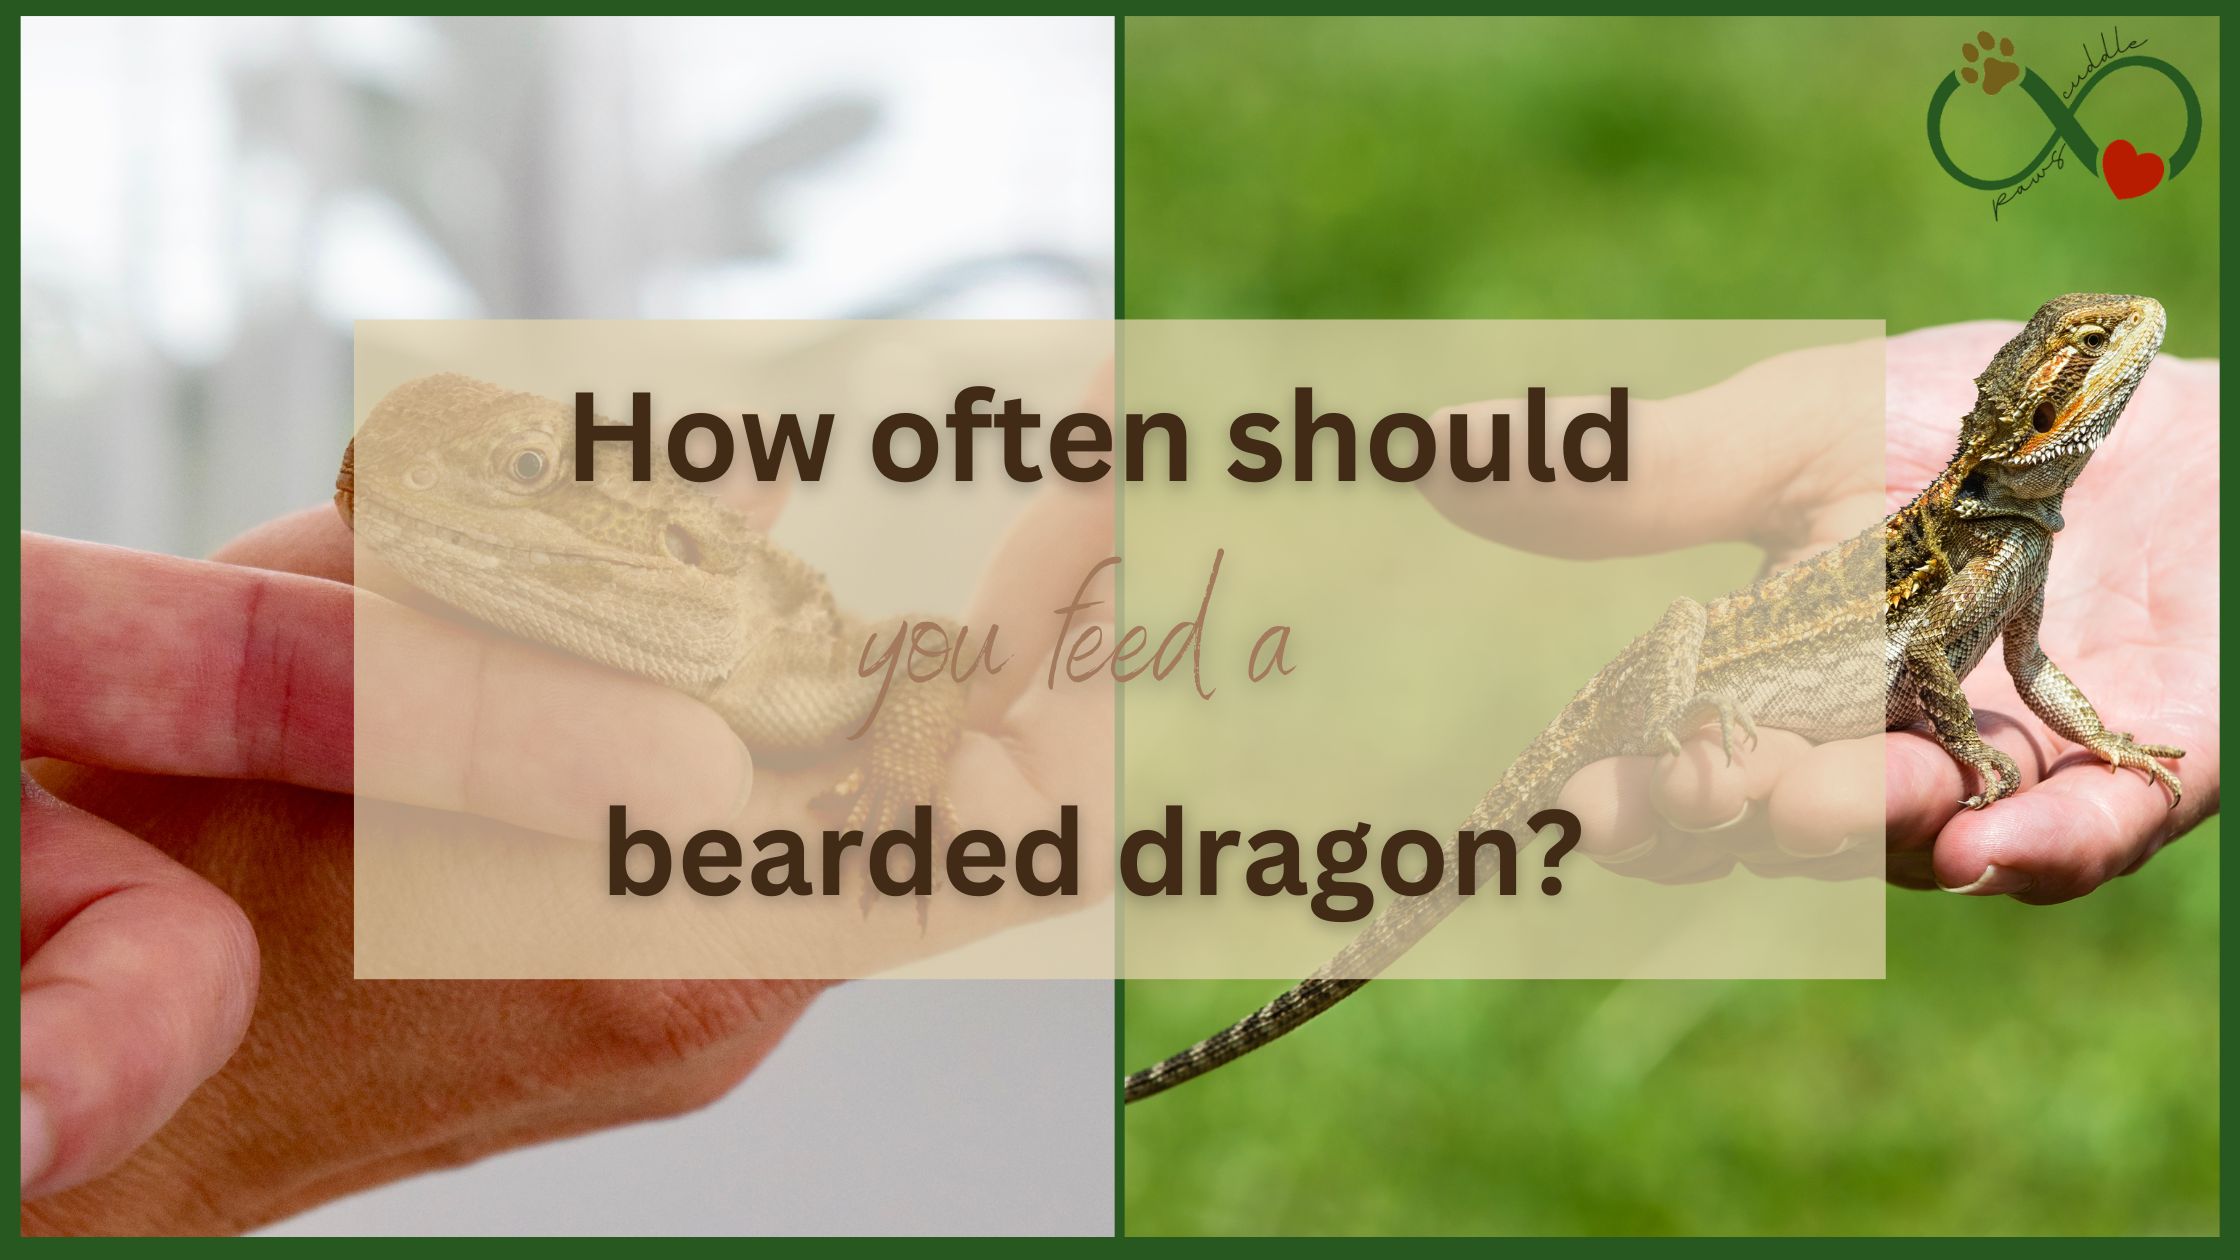 How often should you feed a bearded dragon?